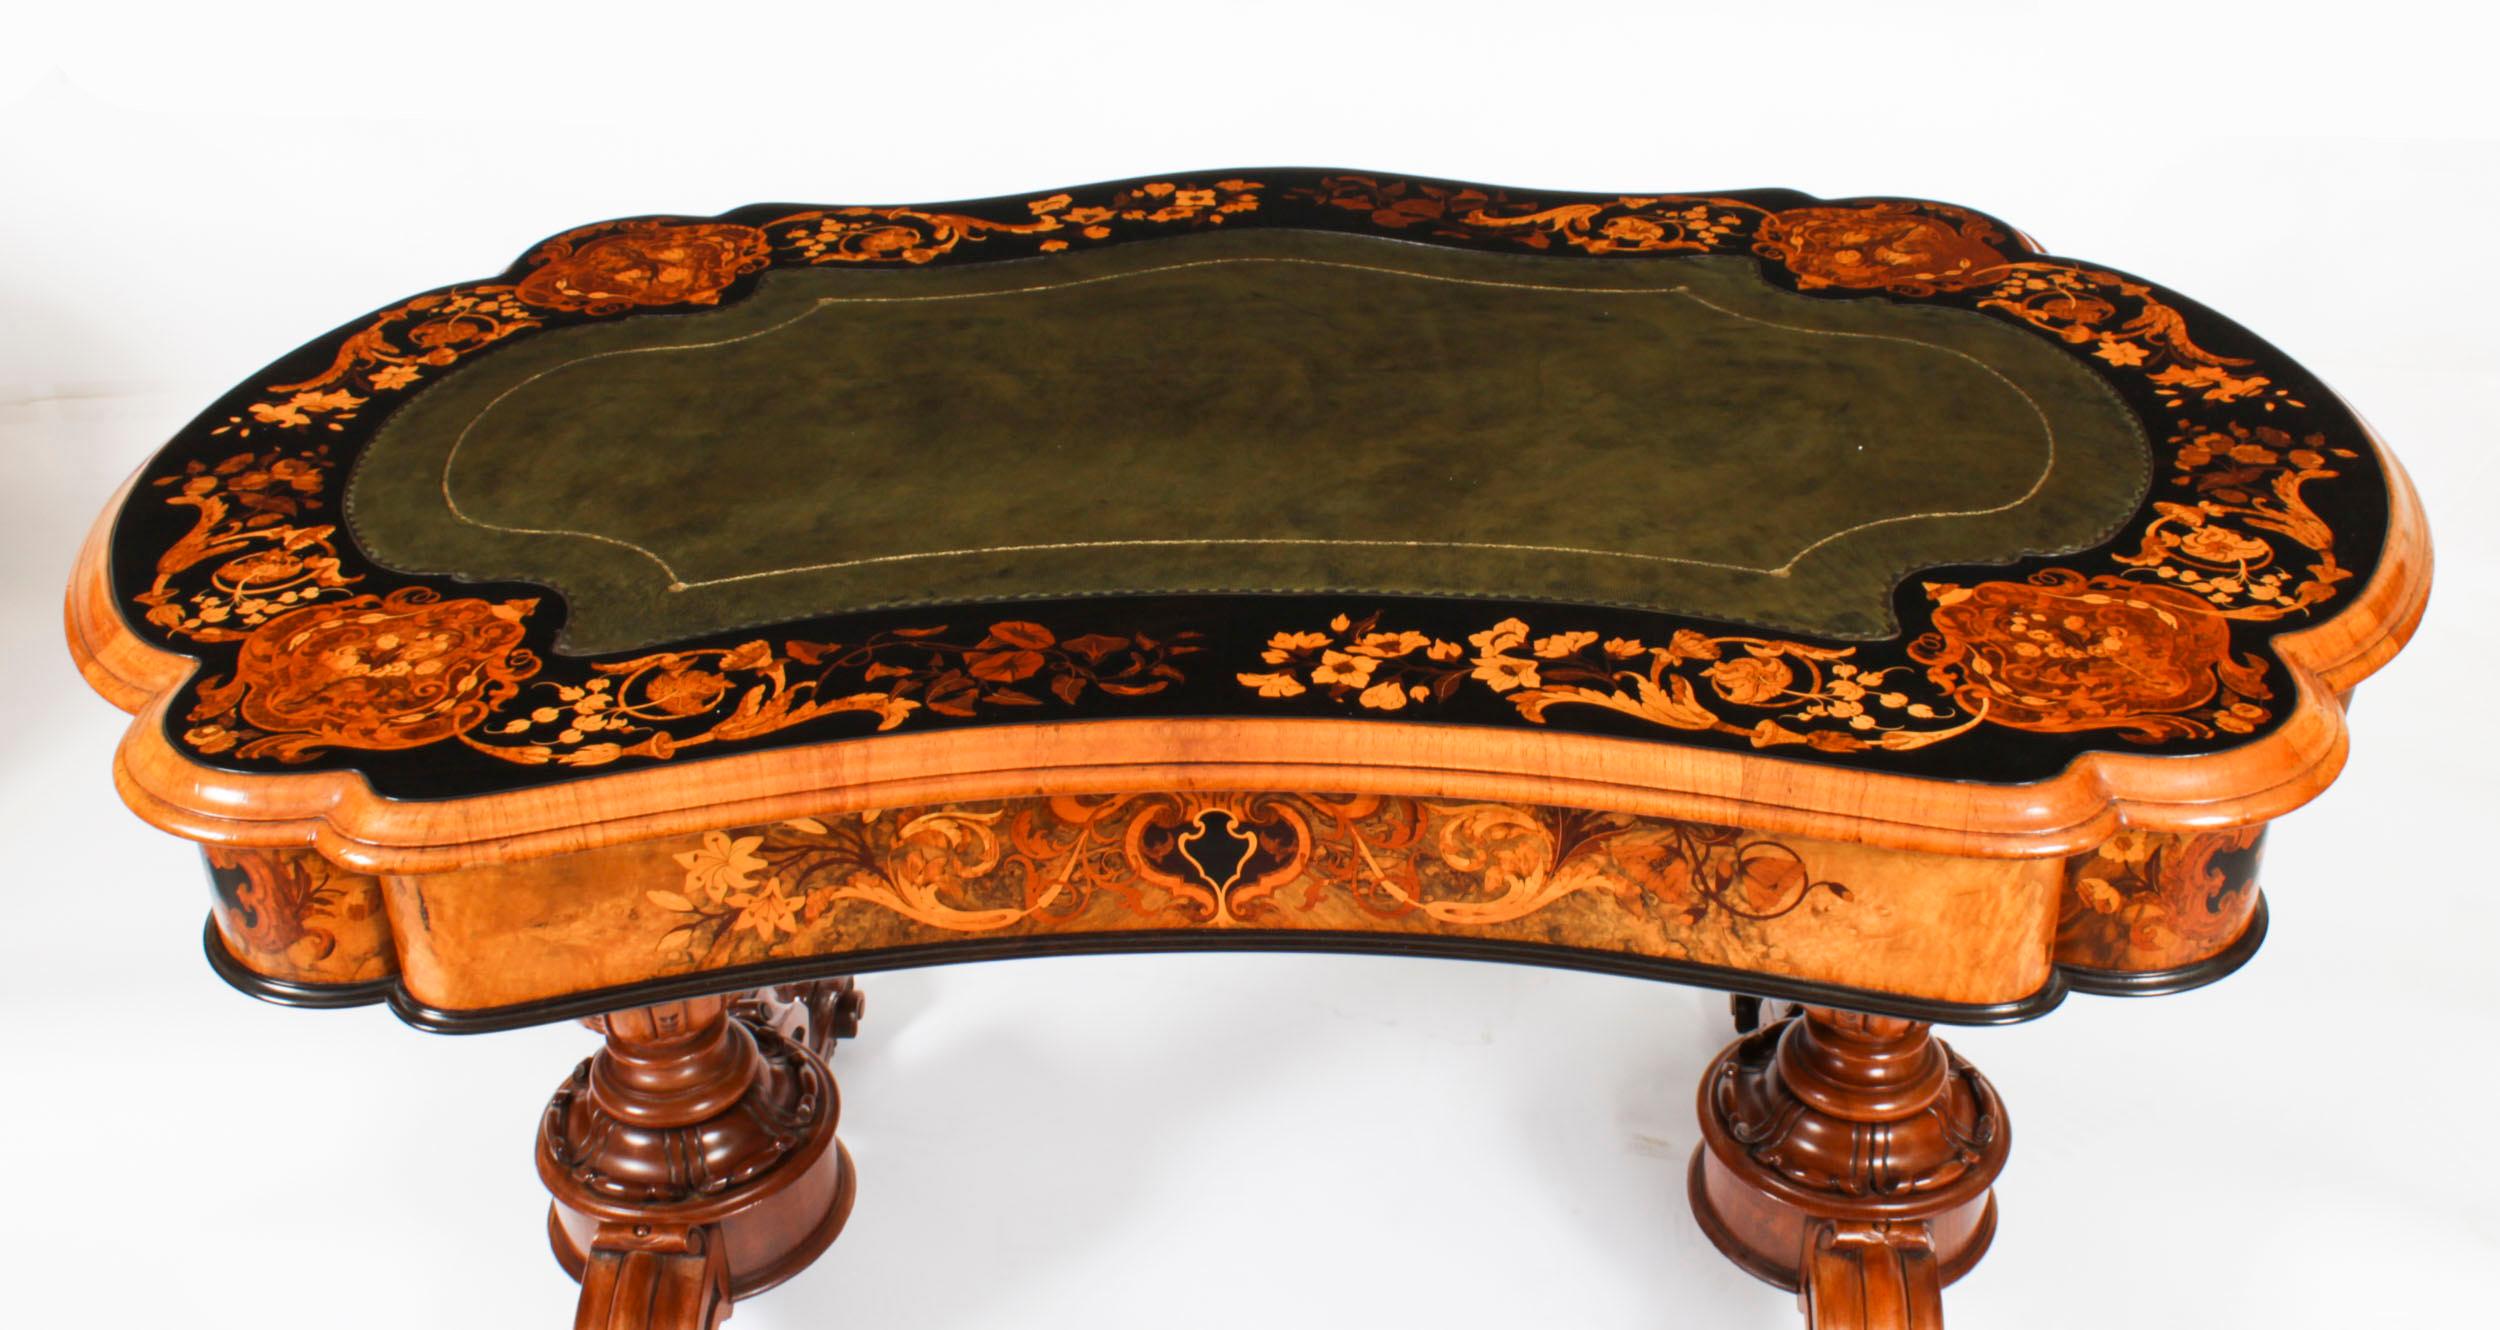 English Antique William IV Burr Walnut Marquetry Kidney Shaped Writing Table Desk 19th C